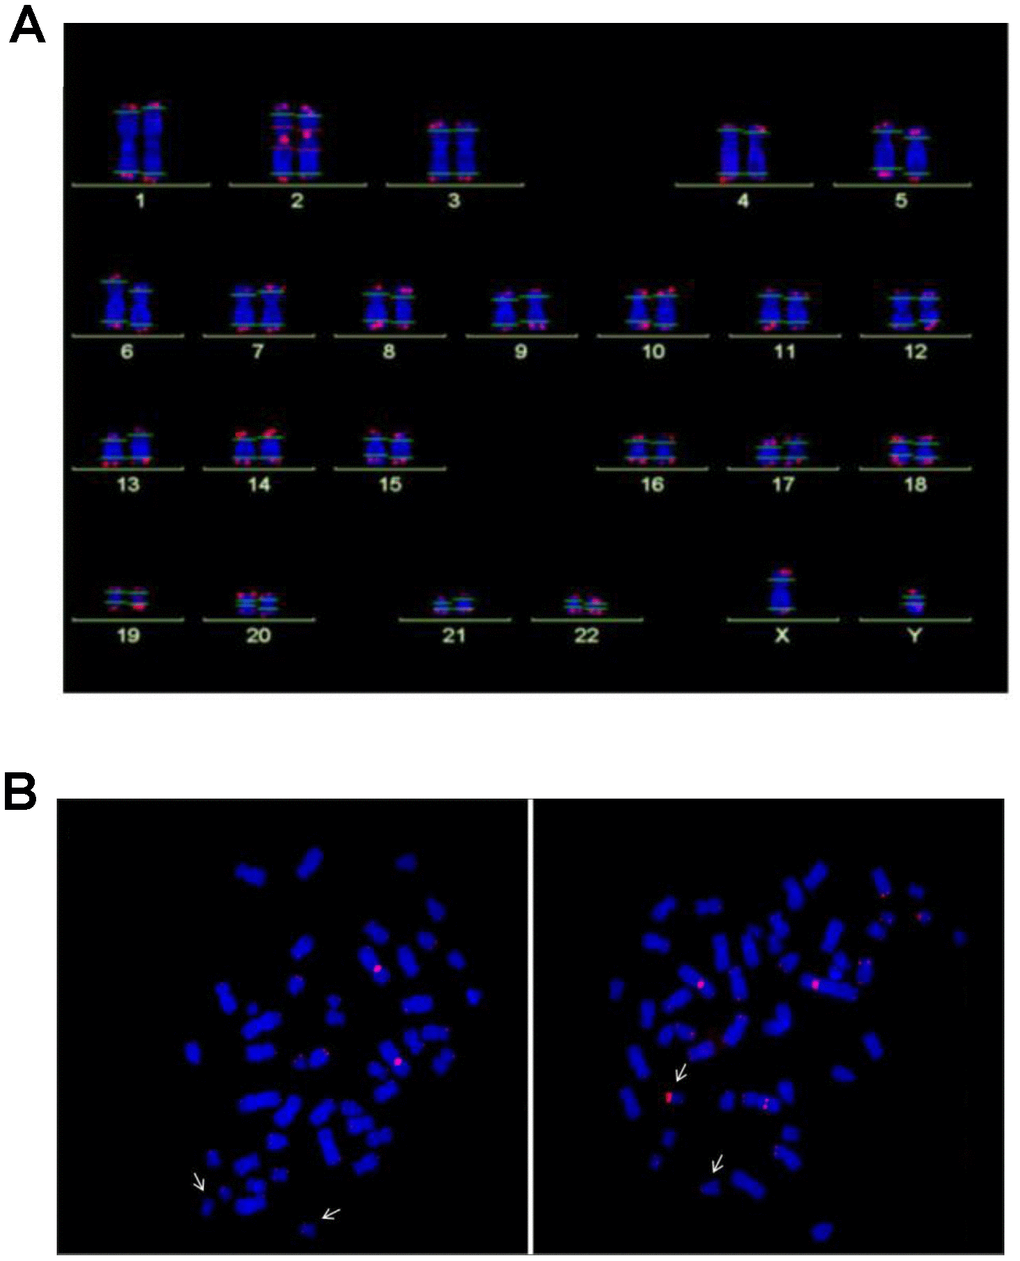 (A) Analysis of telomere length by Q-FISH. Normal karyogram with single telomeres stained for telomere repeats (Q-FISH) and a repetitive region in the centromeric region of chromosome 2. The horizontal lines overlaid on each chromosome define the measurement areas. (B) Metaphases of the NBS LCL 94P0307 after Q-FISH of the NBS cell line 94P0307 with very short telomeres and a telomere fusion. The arrows point to chromosomes 19. Left panel, Metaphase with weak telomerice fluorescence of both chromosomes 19; Right panel, Metaphase with one chromosome 19 with a brightly fluorescent telomere of the p-arm. The other bright signal is the reference region of chromosome 2. Original after thesis Raneem Habib [28].